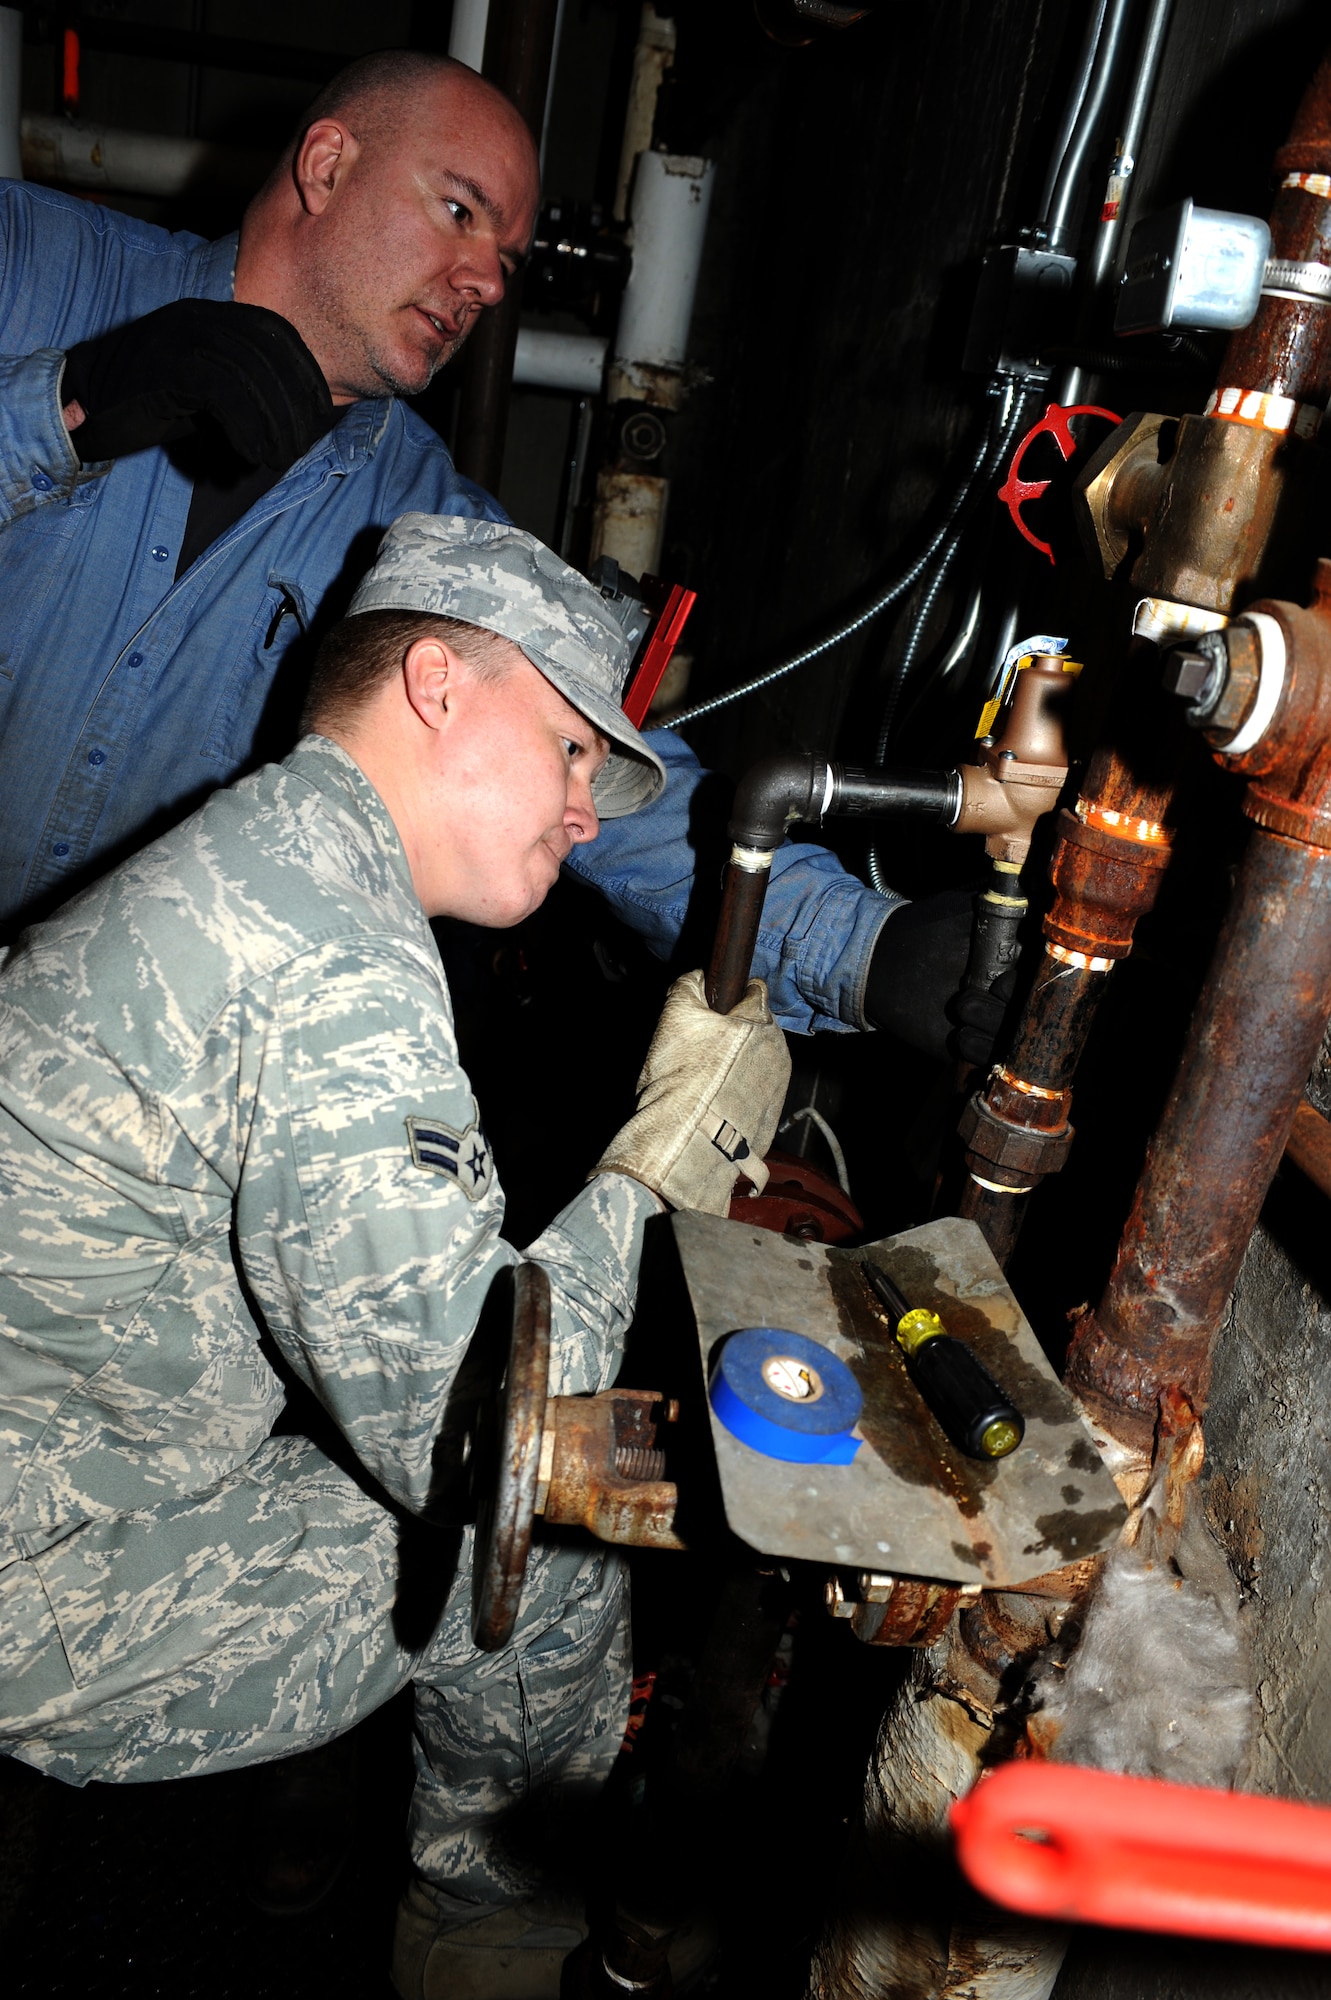 Allan Ford works alongside Airman 1st Class Joshua Bacon to tighten unions connecting the heat exchanger to the heating system. Ford works with the 3rd CES, and is a HVAC Maintenance Mechanic who has served as an Infantry Marine. Bacon is a 3rd CES HVAC 3131.(U.S. Air Force Photo by Airman Jack Sanders) 